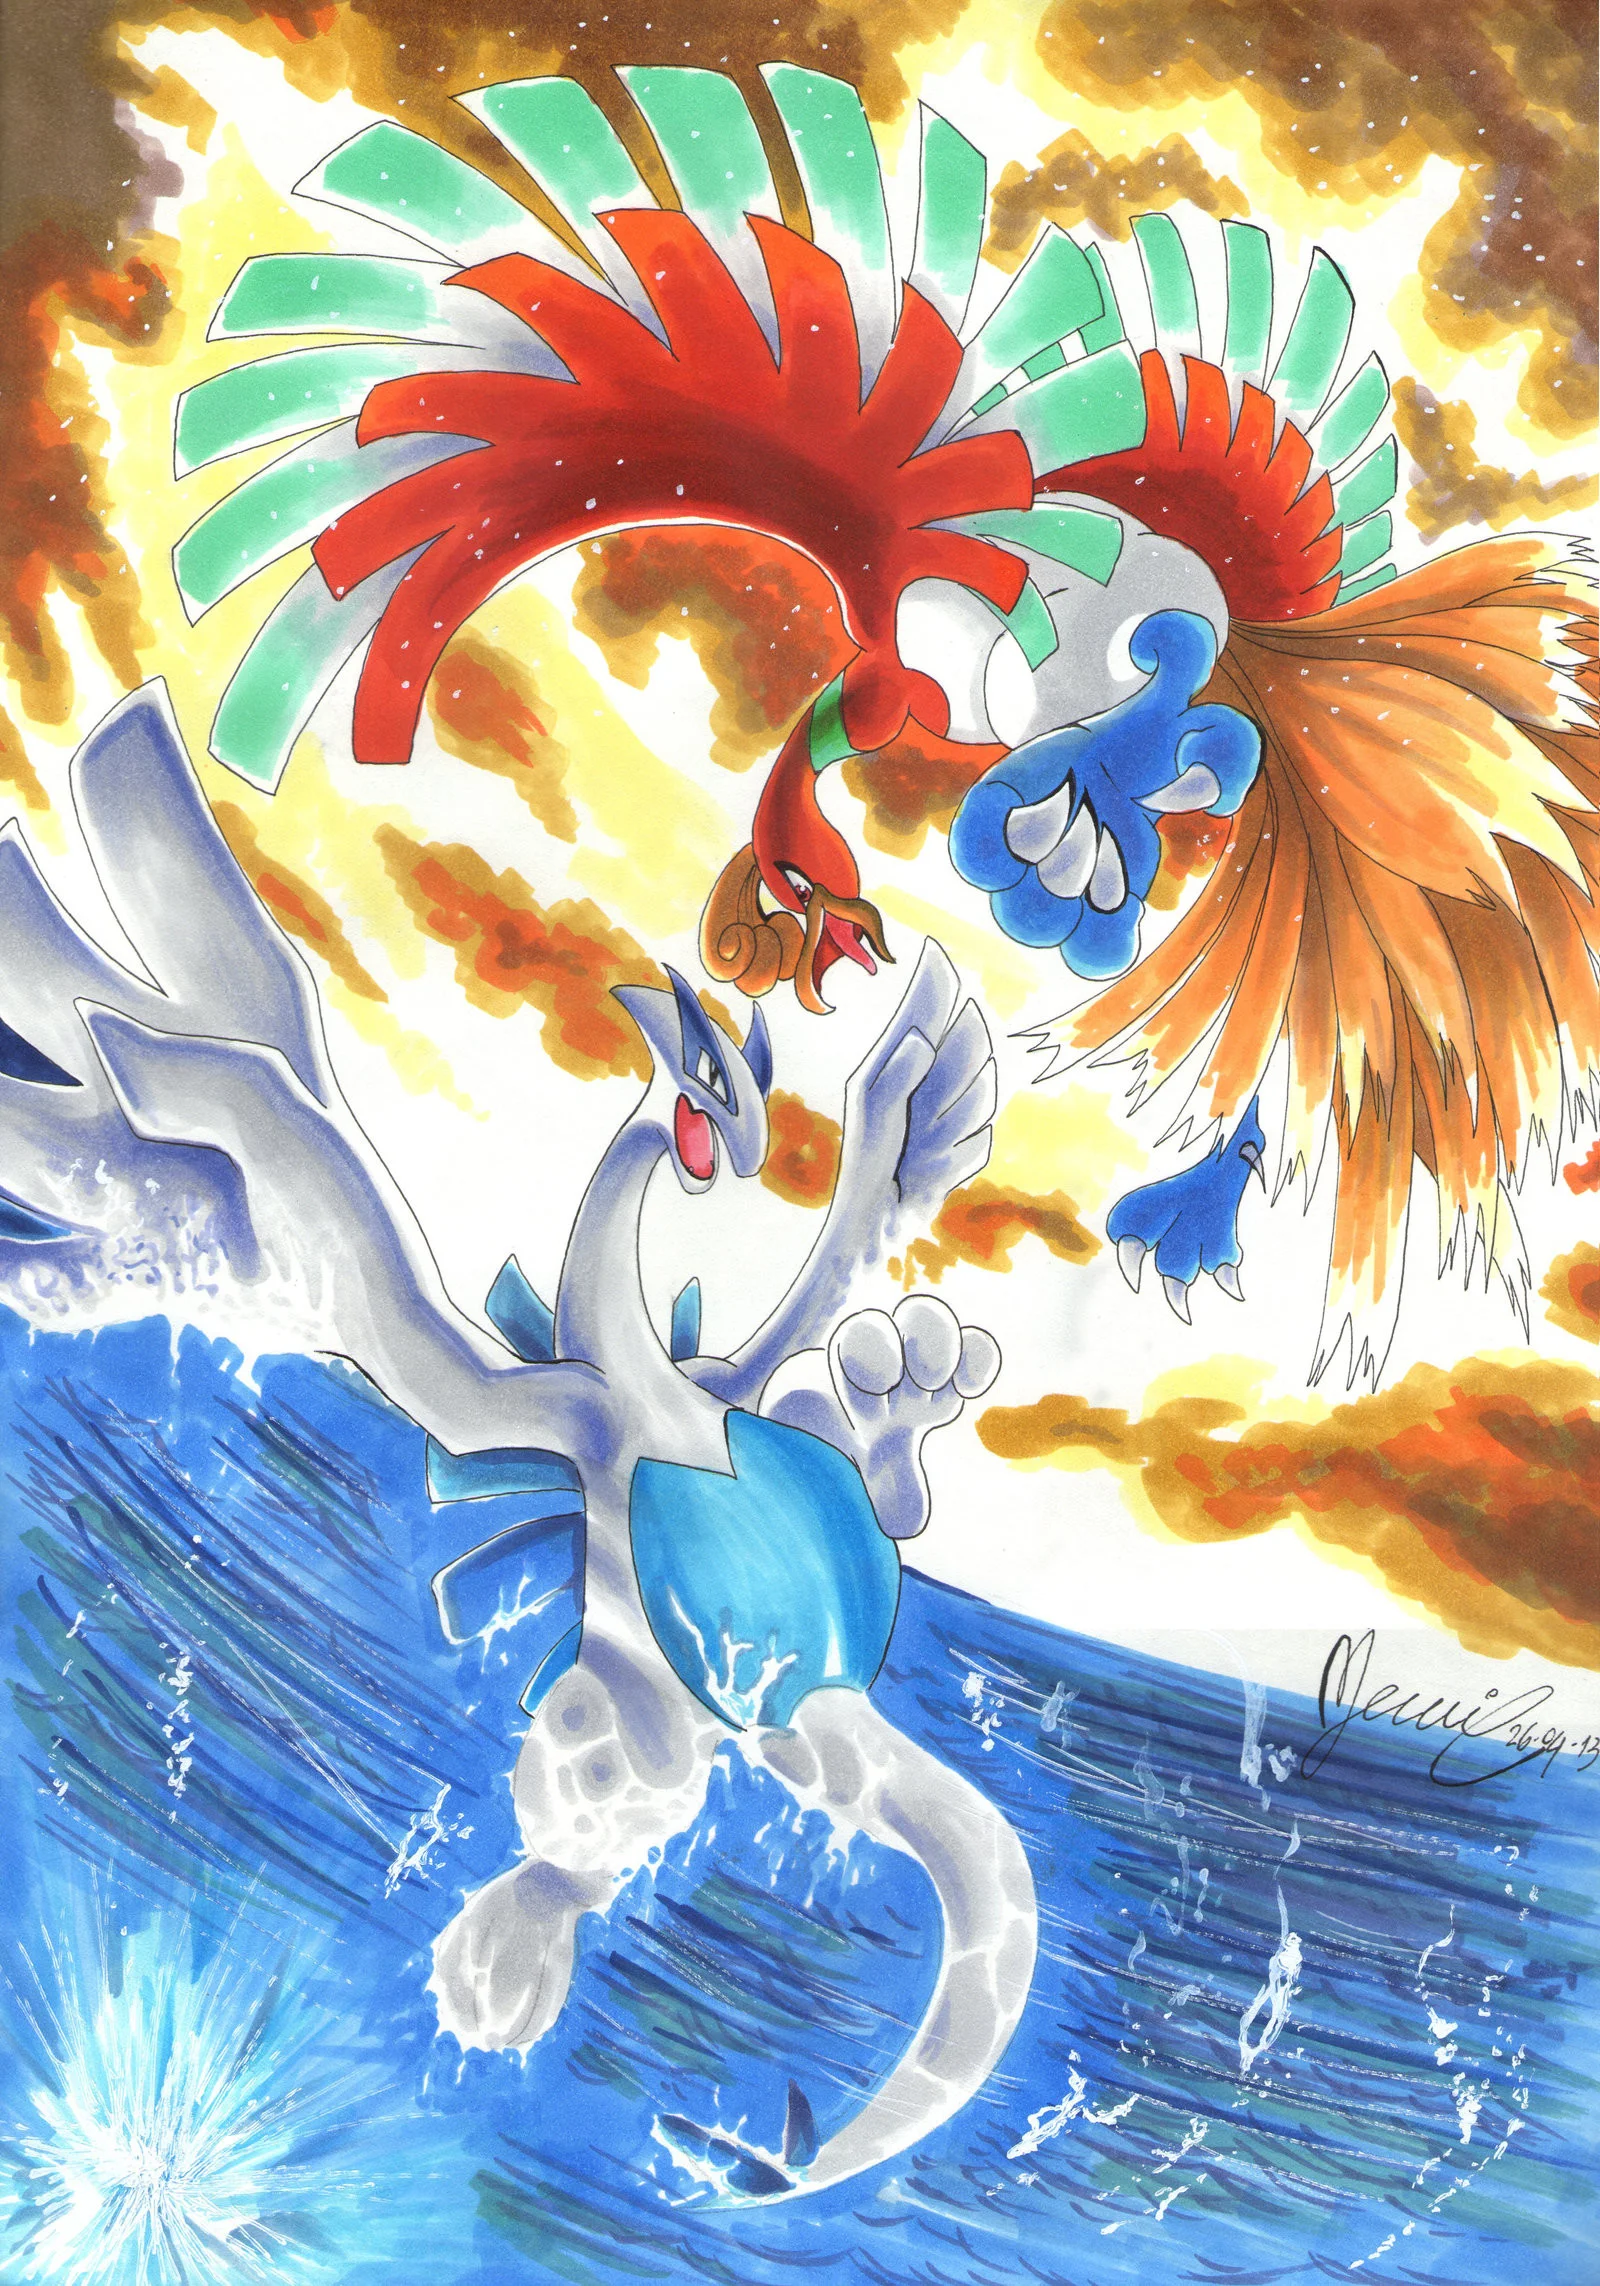 168 Ho Oh And Lugia Images, Photos, Reviews